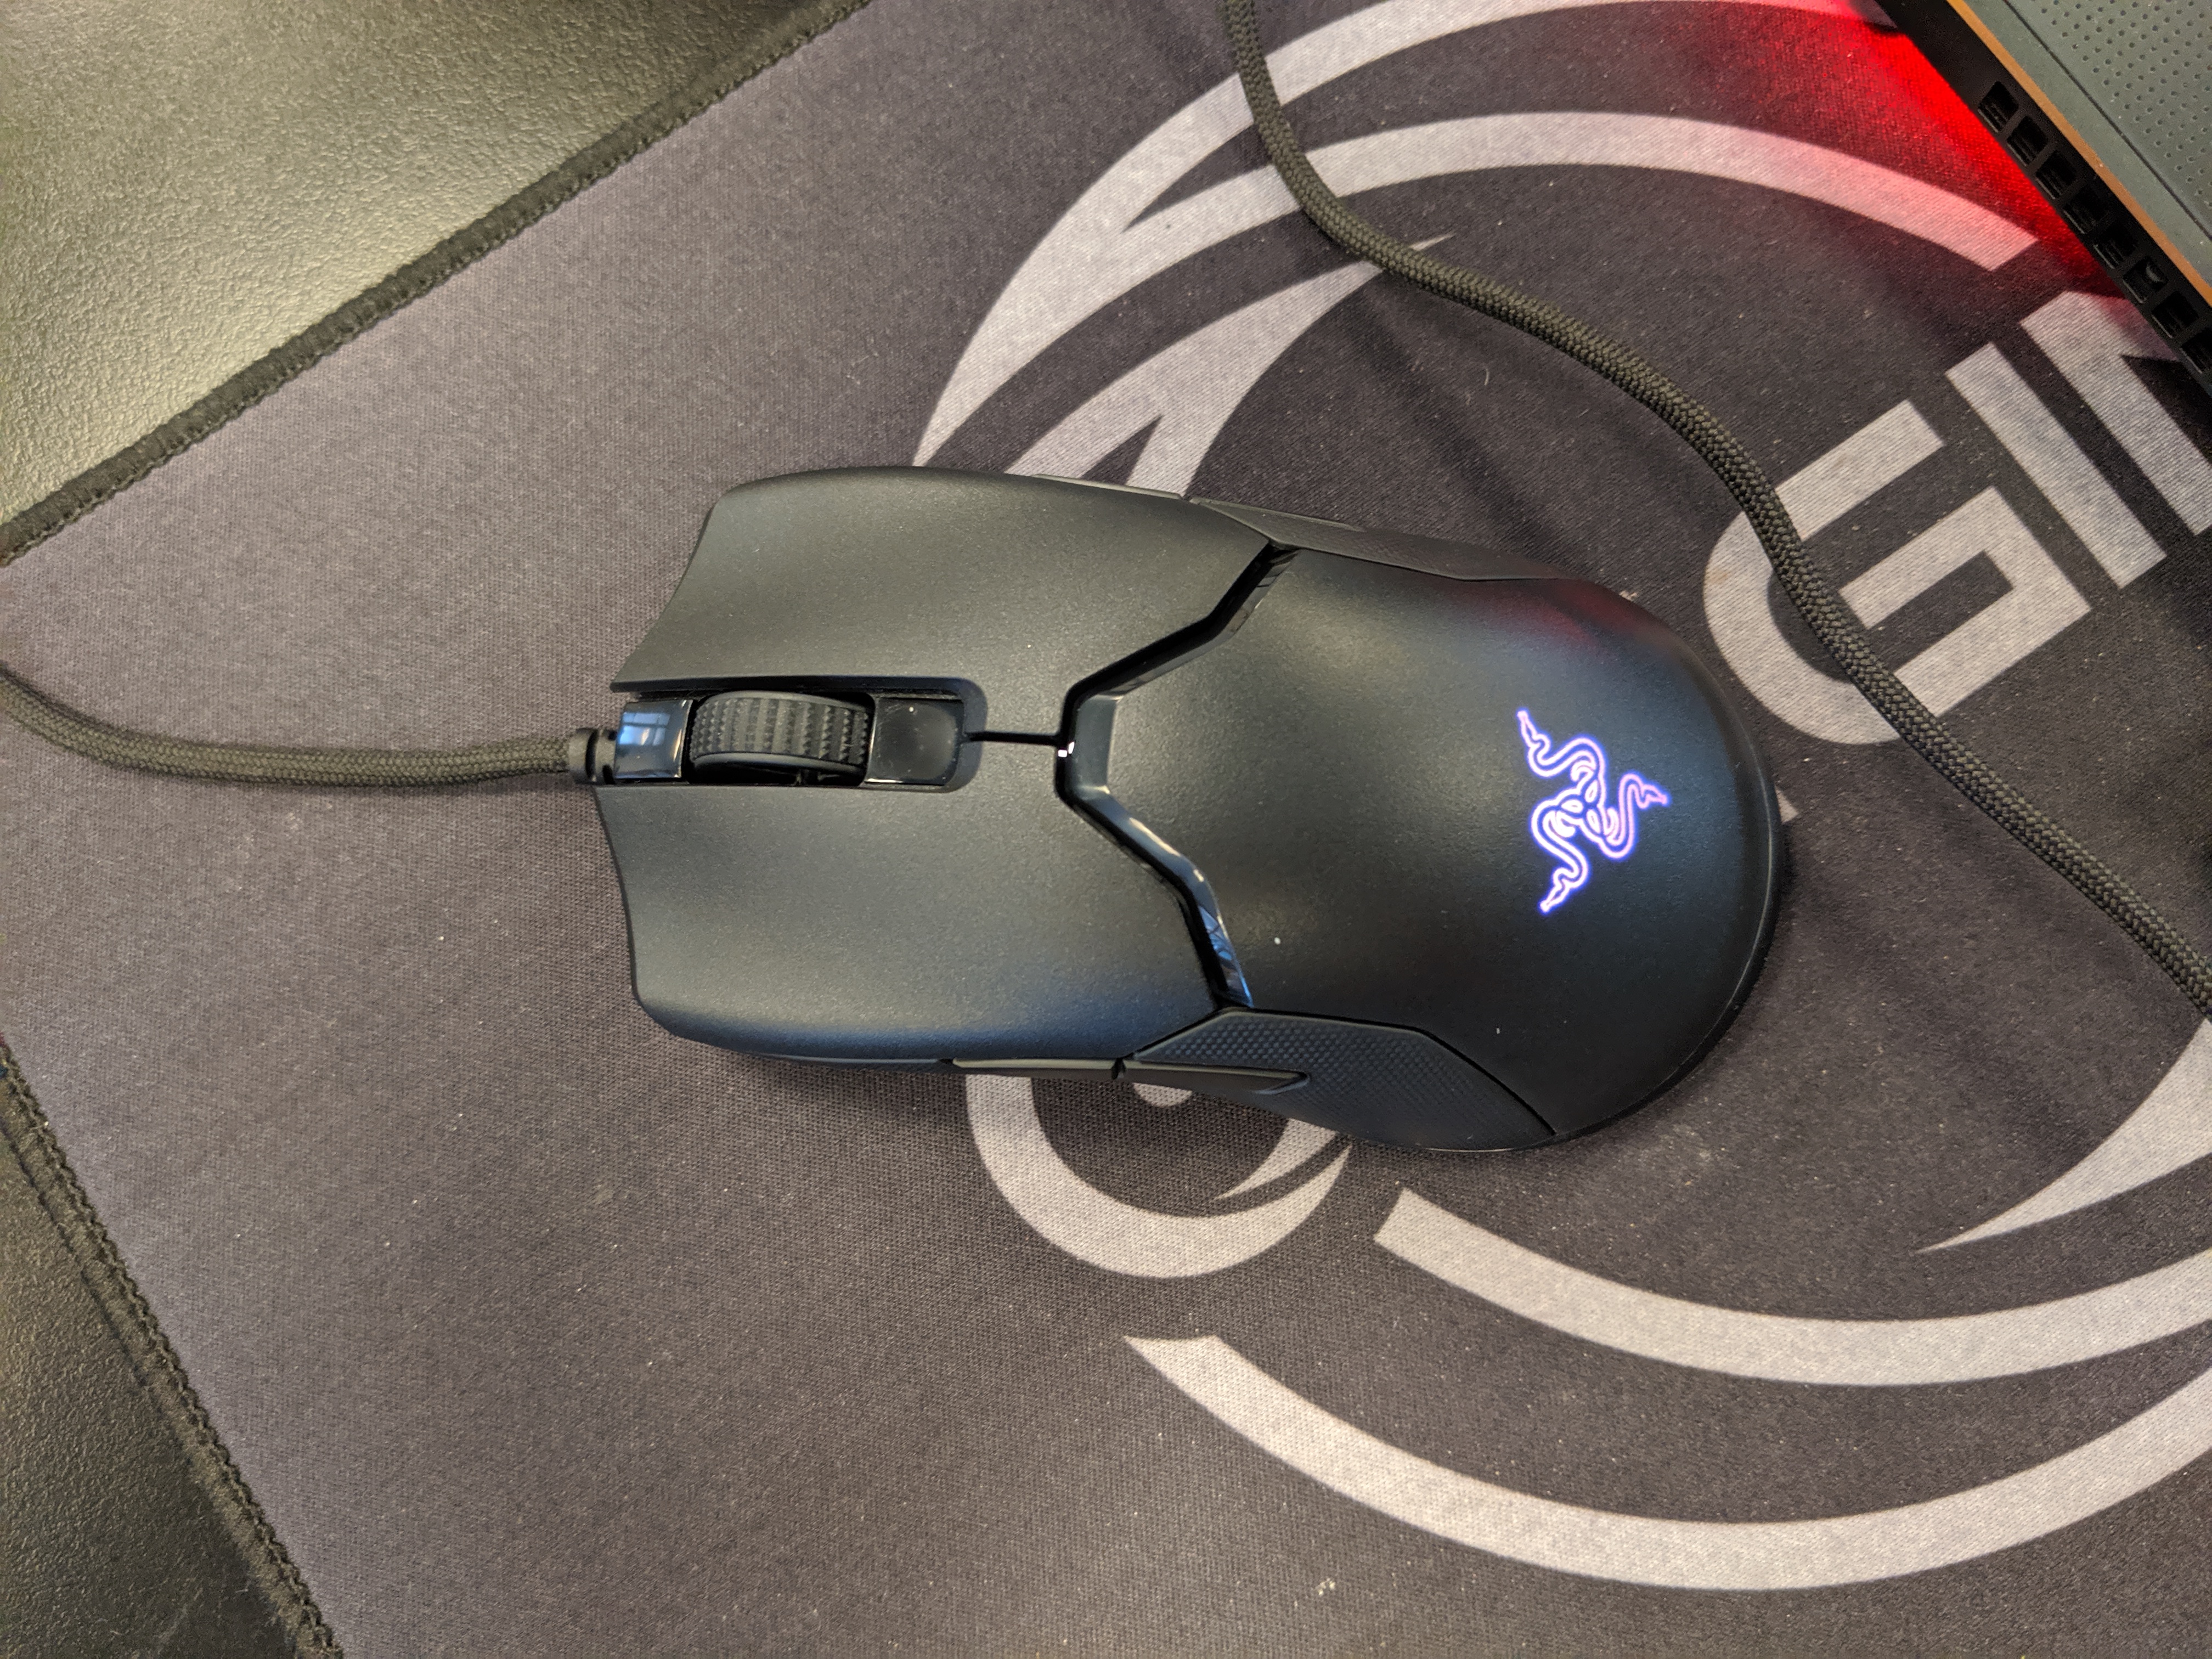 Razer Viper Wired Gaming Mouse